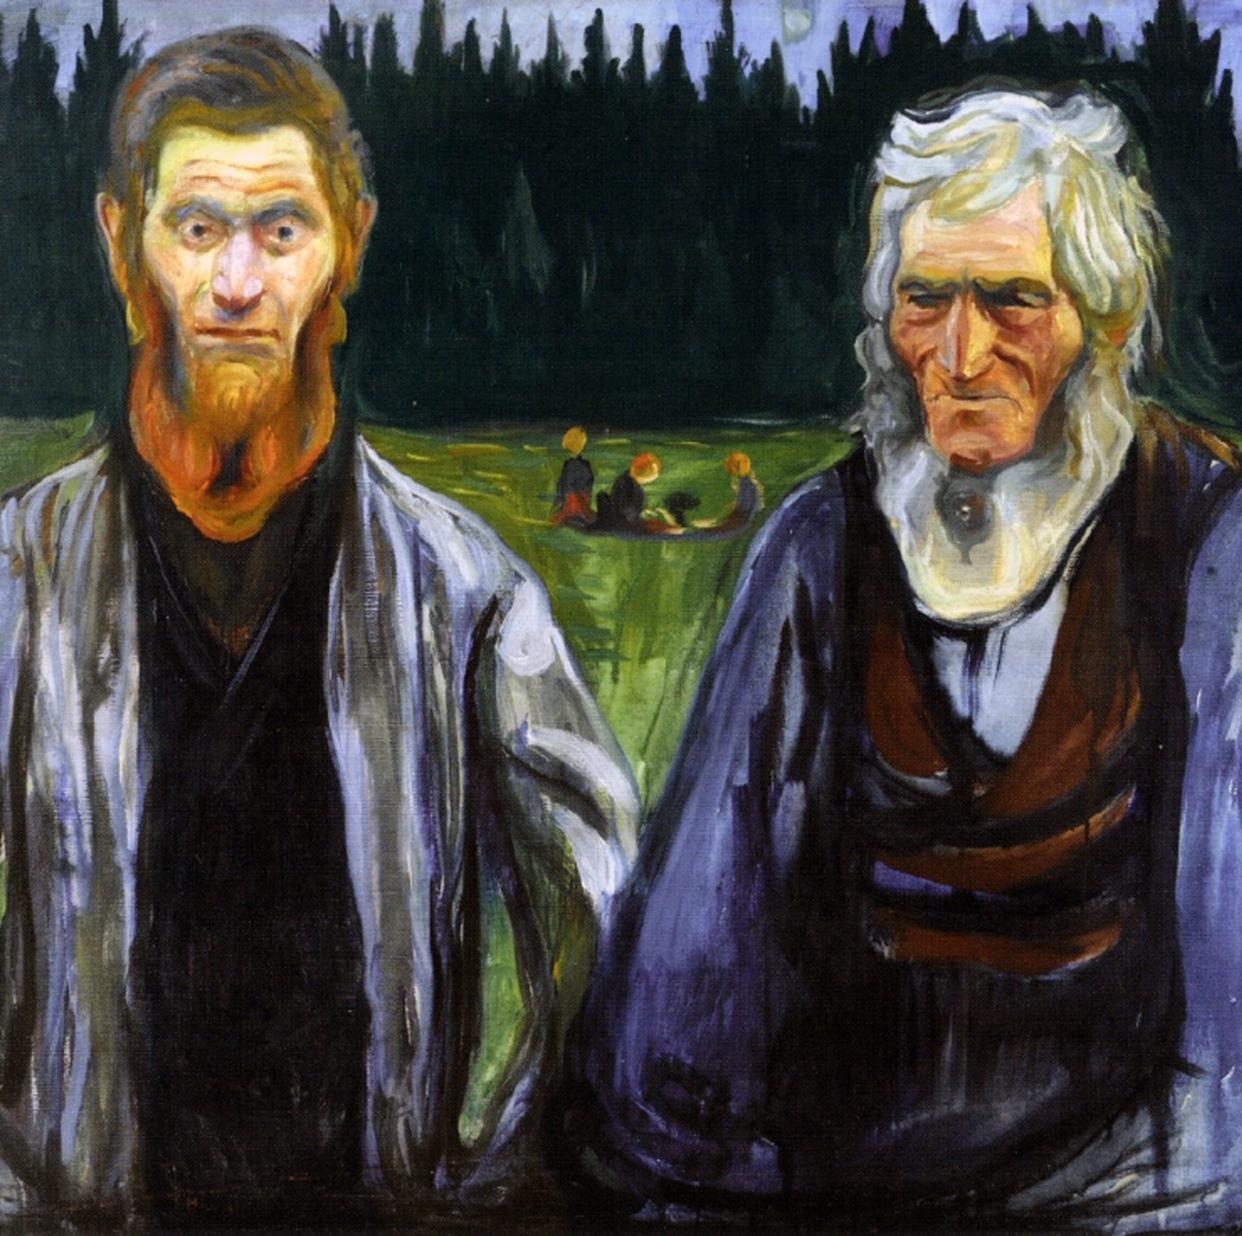 Father and Son by Edvard Munch (1863-1944